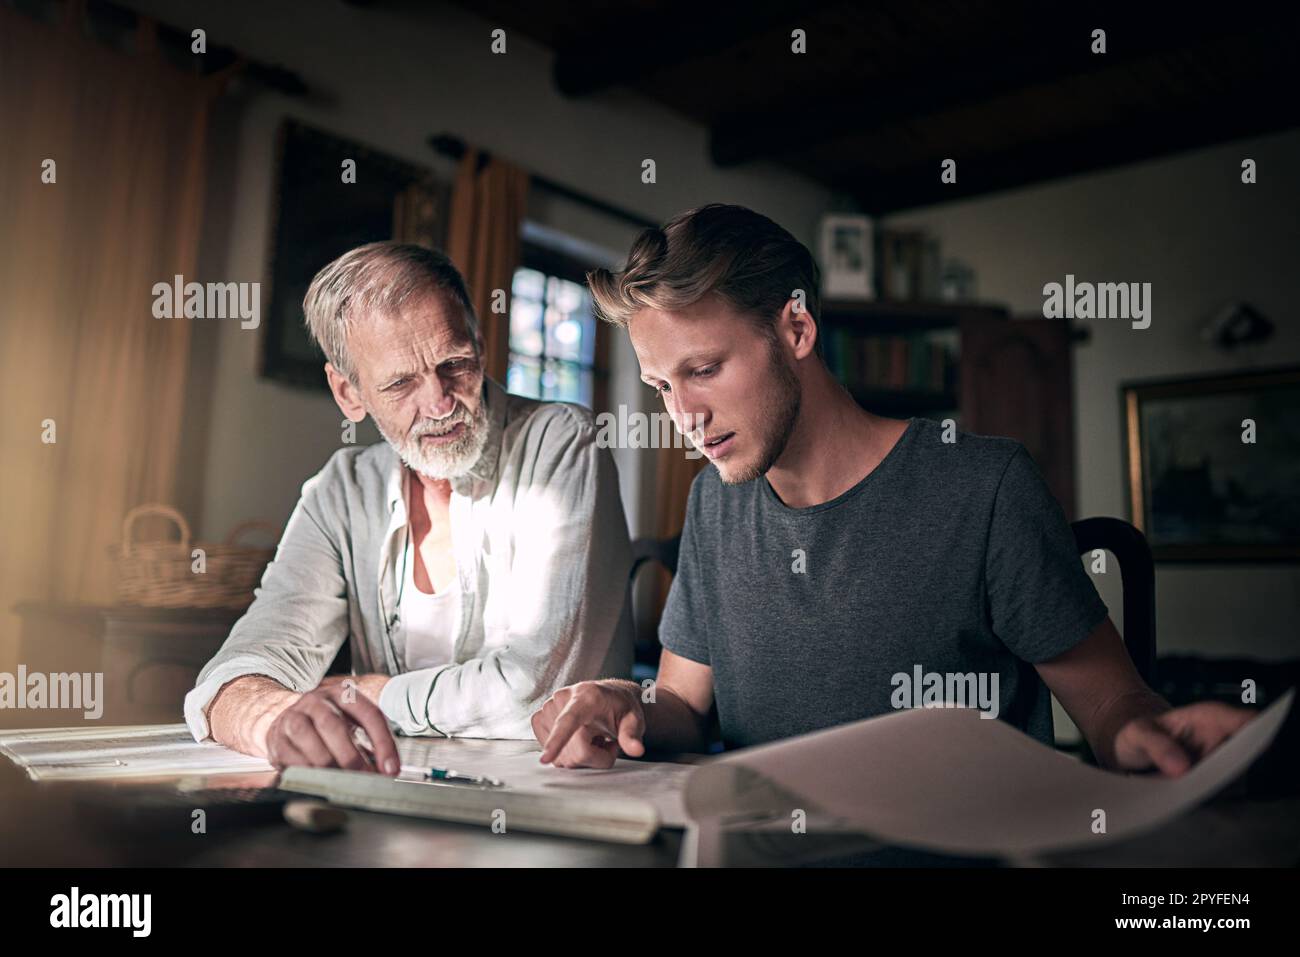 Sometimes it helps to have a fresh set of eyes. a father and his son working on a design for their family business at home. Stock Photo